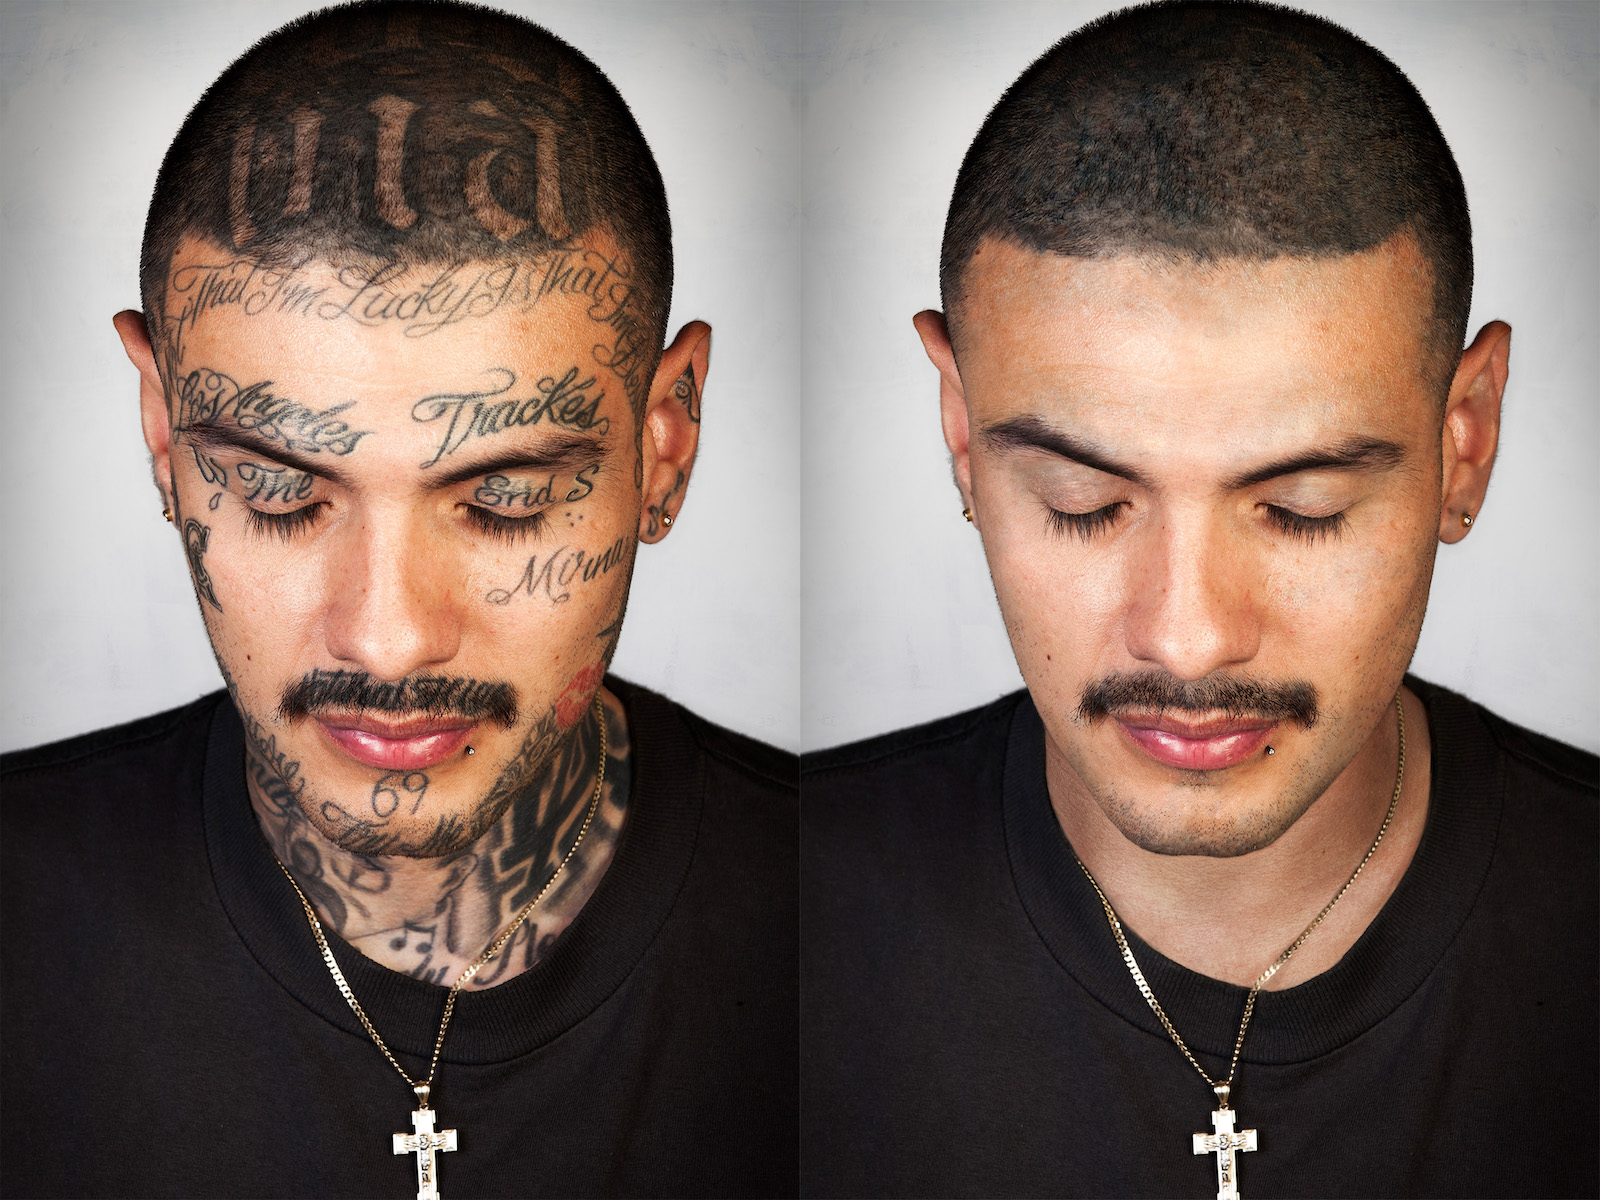 100 Notorious Gang Tattoos & Meanings (Ultimate Guide, 2020) | Prison  tattoos, Tattoos with meaning, Gang tattoos